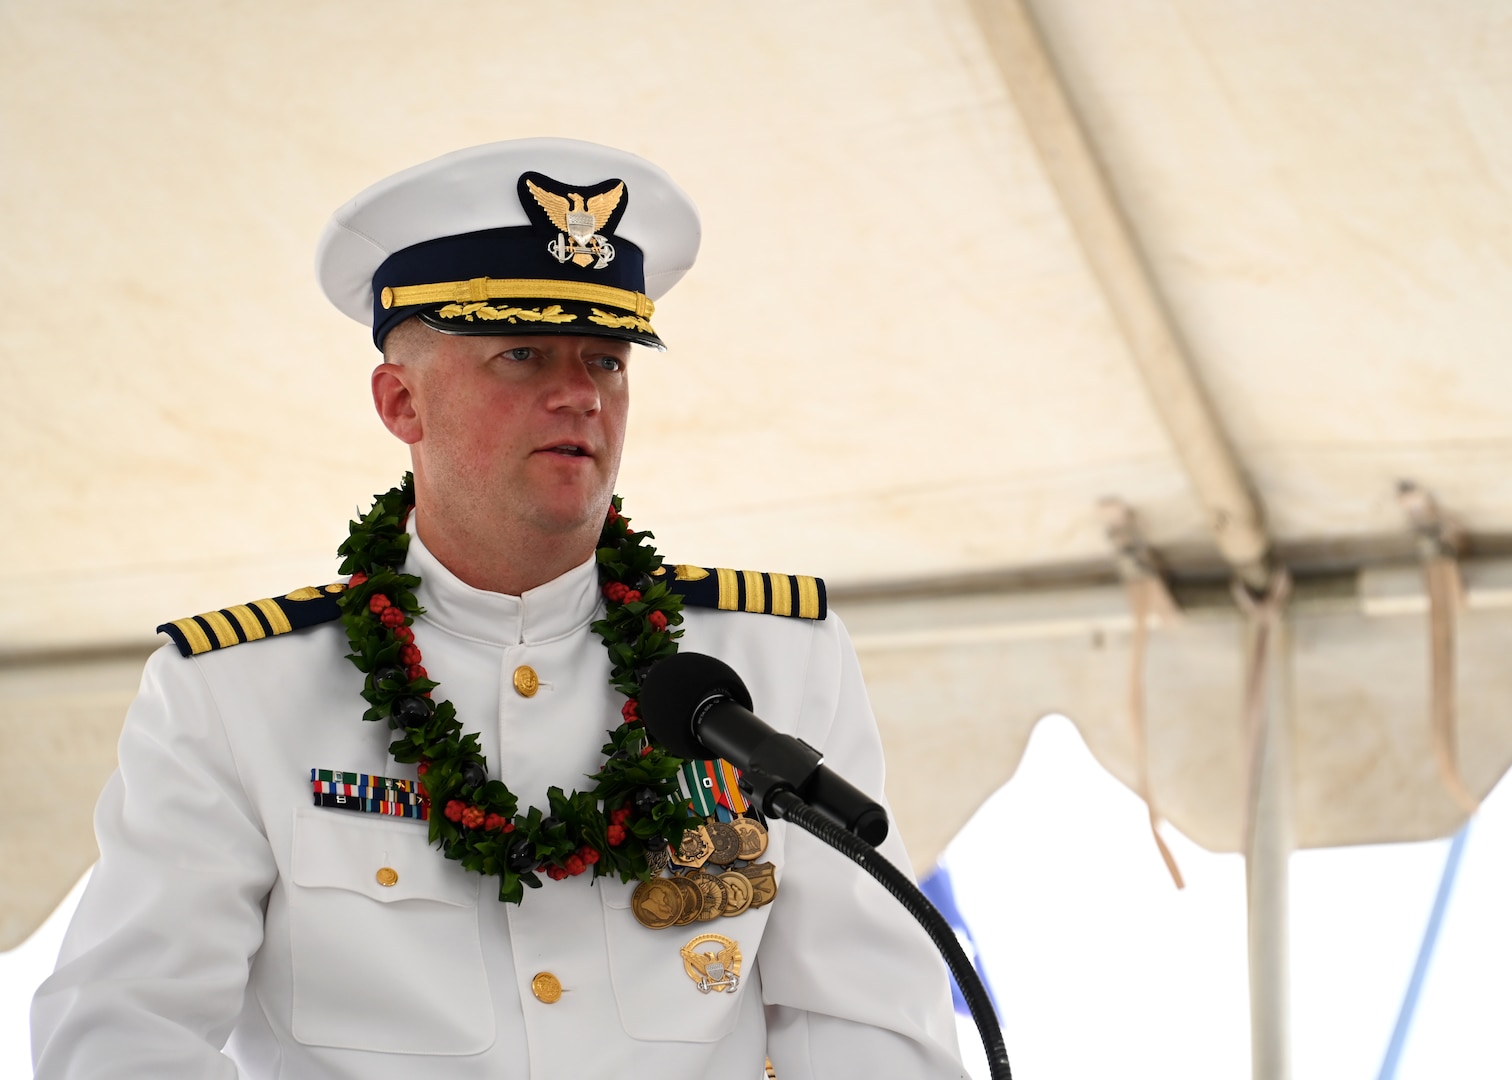 Capt. Matthew Rooney speaks during the U.S. Coast Guard Cutter Midgett’s (WMSL 757) change of command ceremony on Coast Guard Base Honolulu, July 20, 2023. Rear Adm. Brendan C. McPherson, deputy commander of U.S. Coast Guard Pacific Area, presided over the ceremony in which Rooney relieved Capt. Willie Carmichael as Midgett’s commanding officer. U.S. Coast Guard photo by Chief Petty Officer Matthew Masaschi.